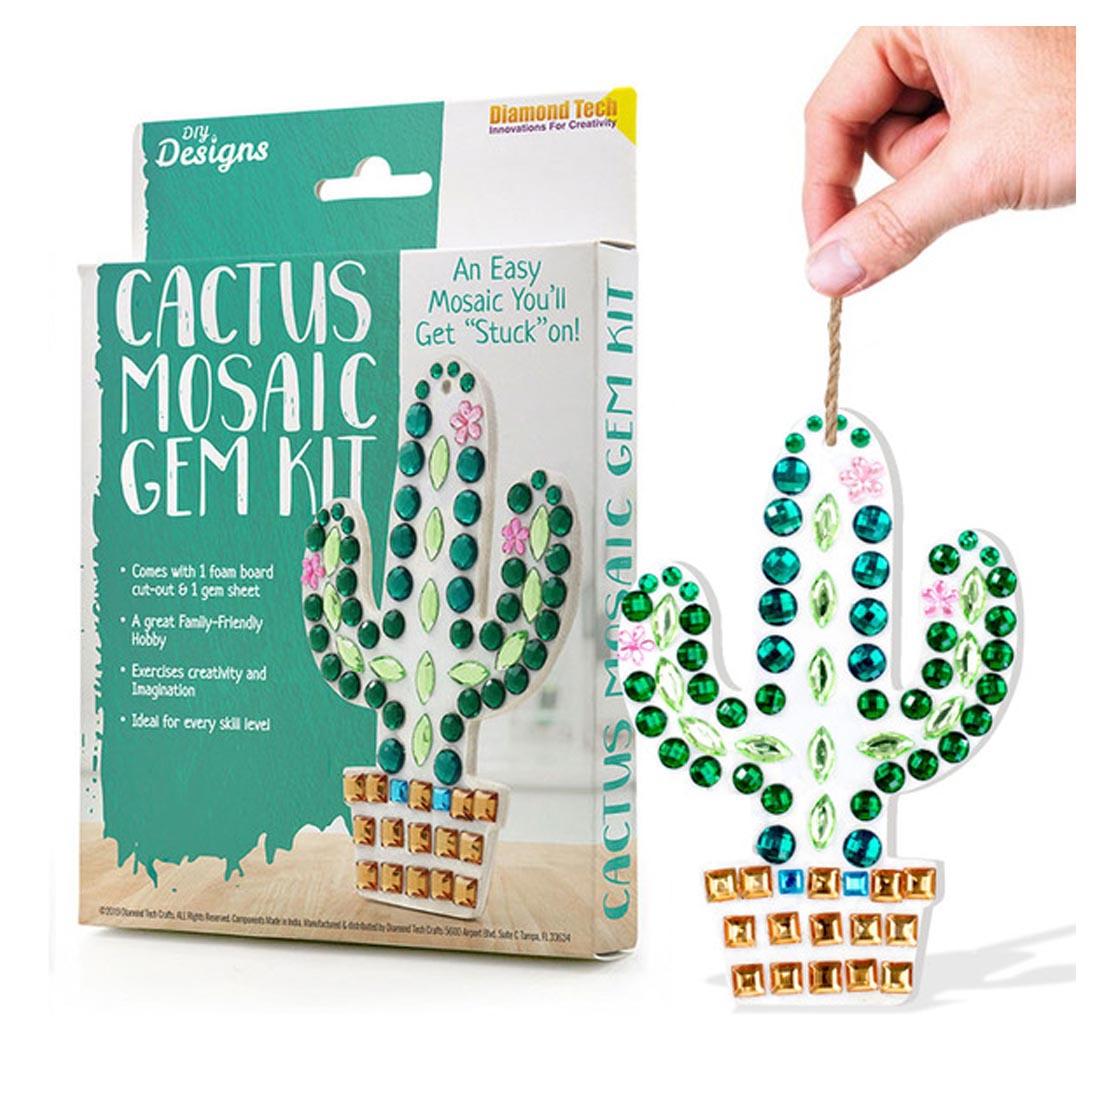 Cactus Mosaic Gem Kit Package Shown Beside a Completed Cactus hanging from a string